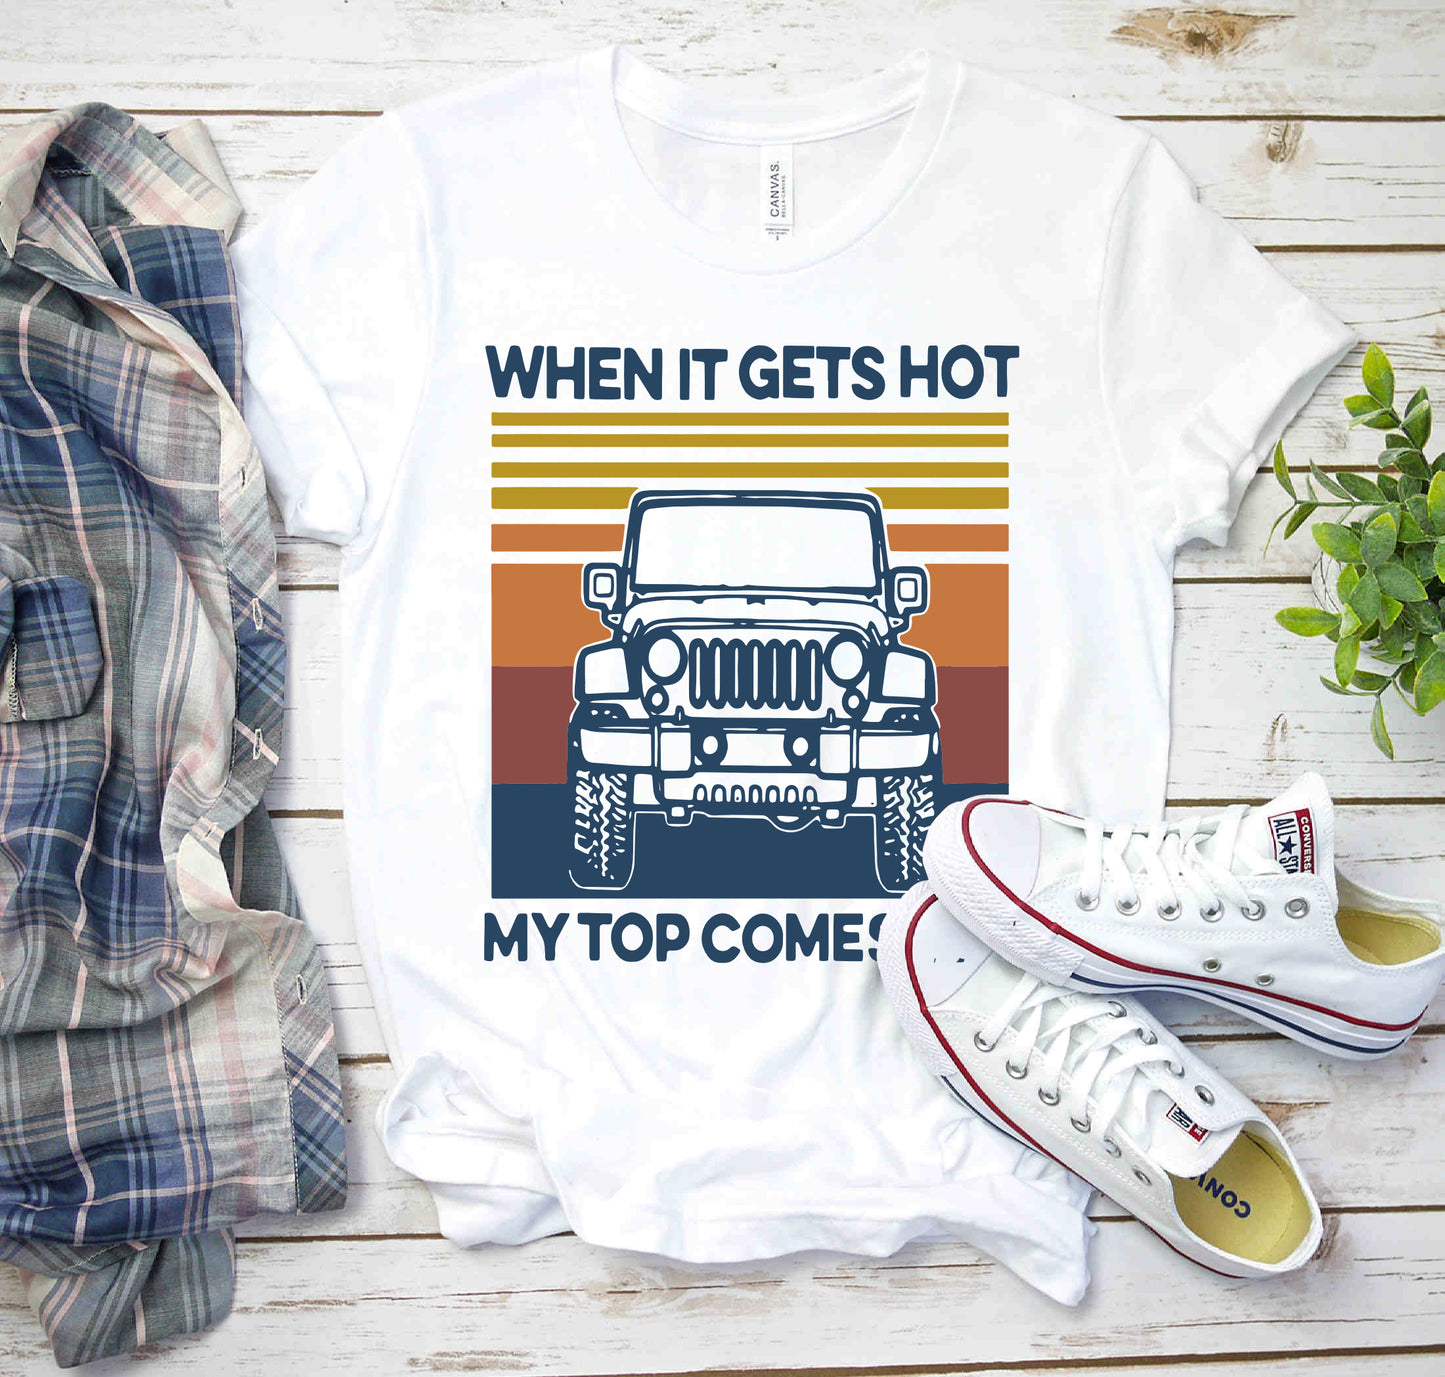 It's Getting Hot . . . Get That Jeep Out Girl!